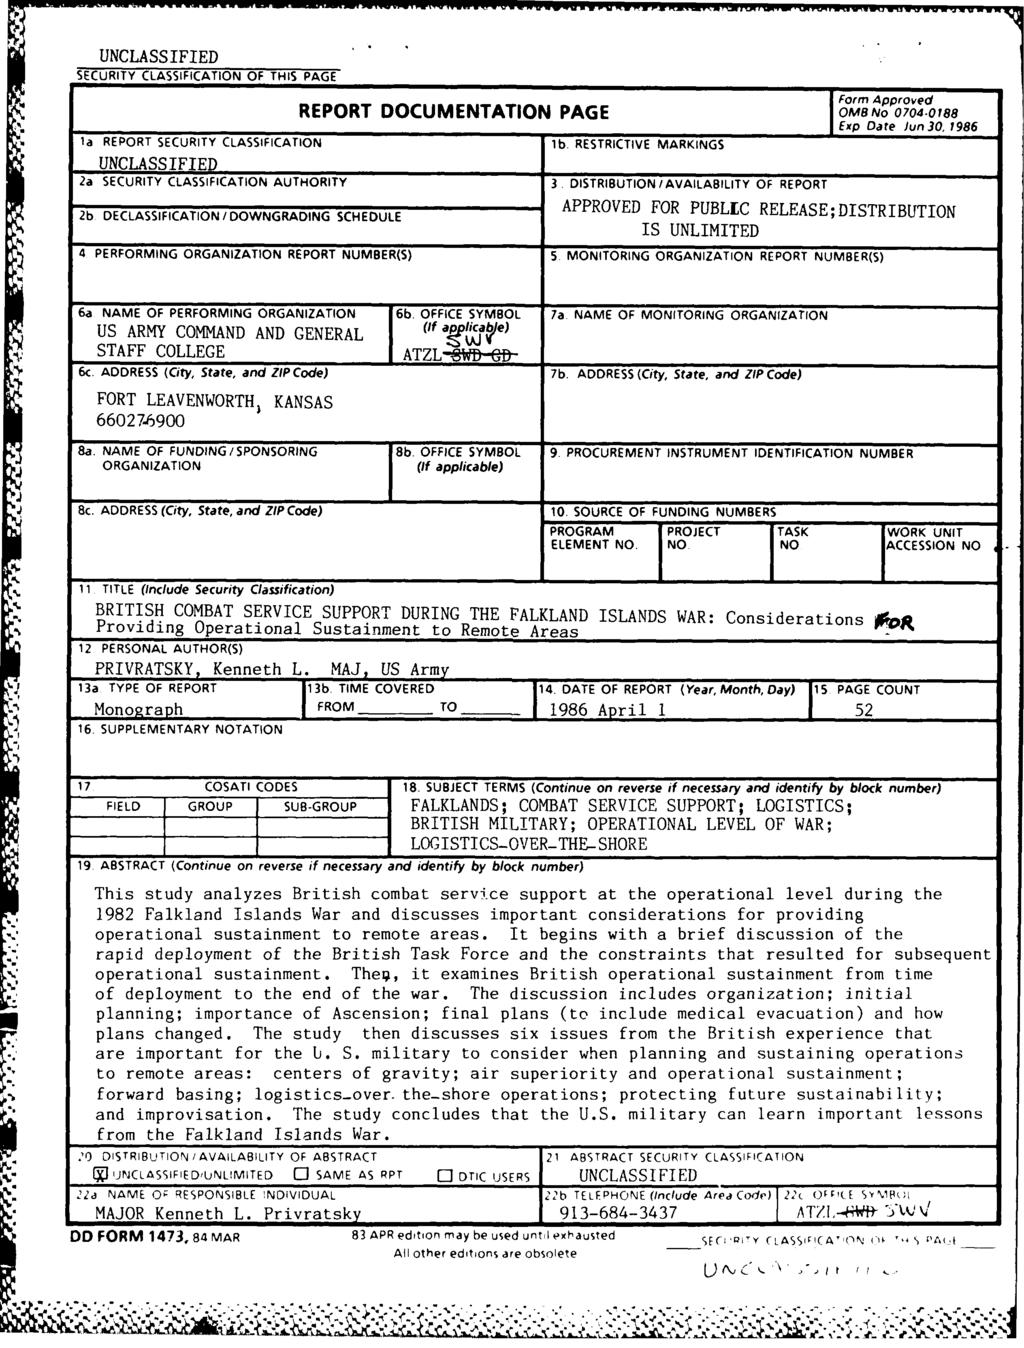 UNCLASSIFIED SECURITY CLASSIFICATION OF THIS PAGE Form Approved REPORT DOCUMENTATION PAGE OMB No 0704-0188 1 Exp Date Jun30, 1986 la REPORT SECURITY CLASSIFICATION lb.